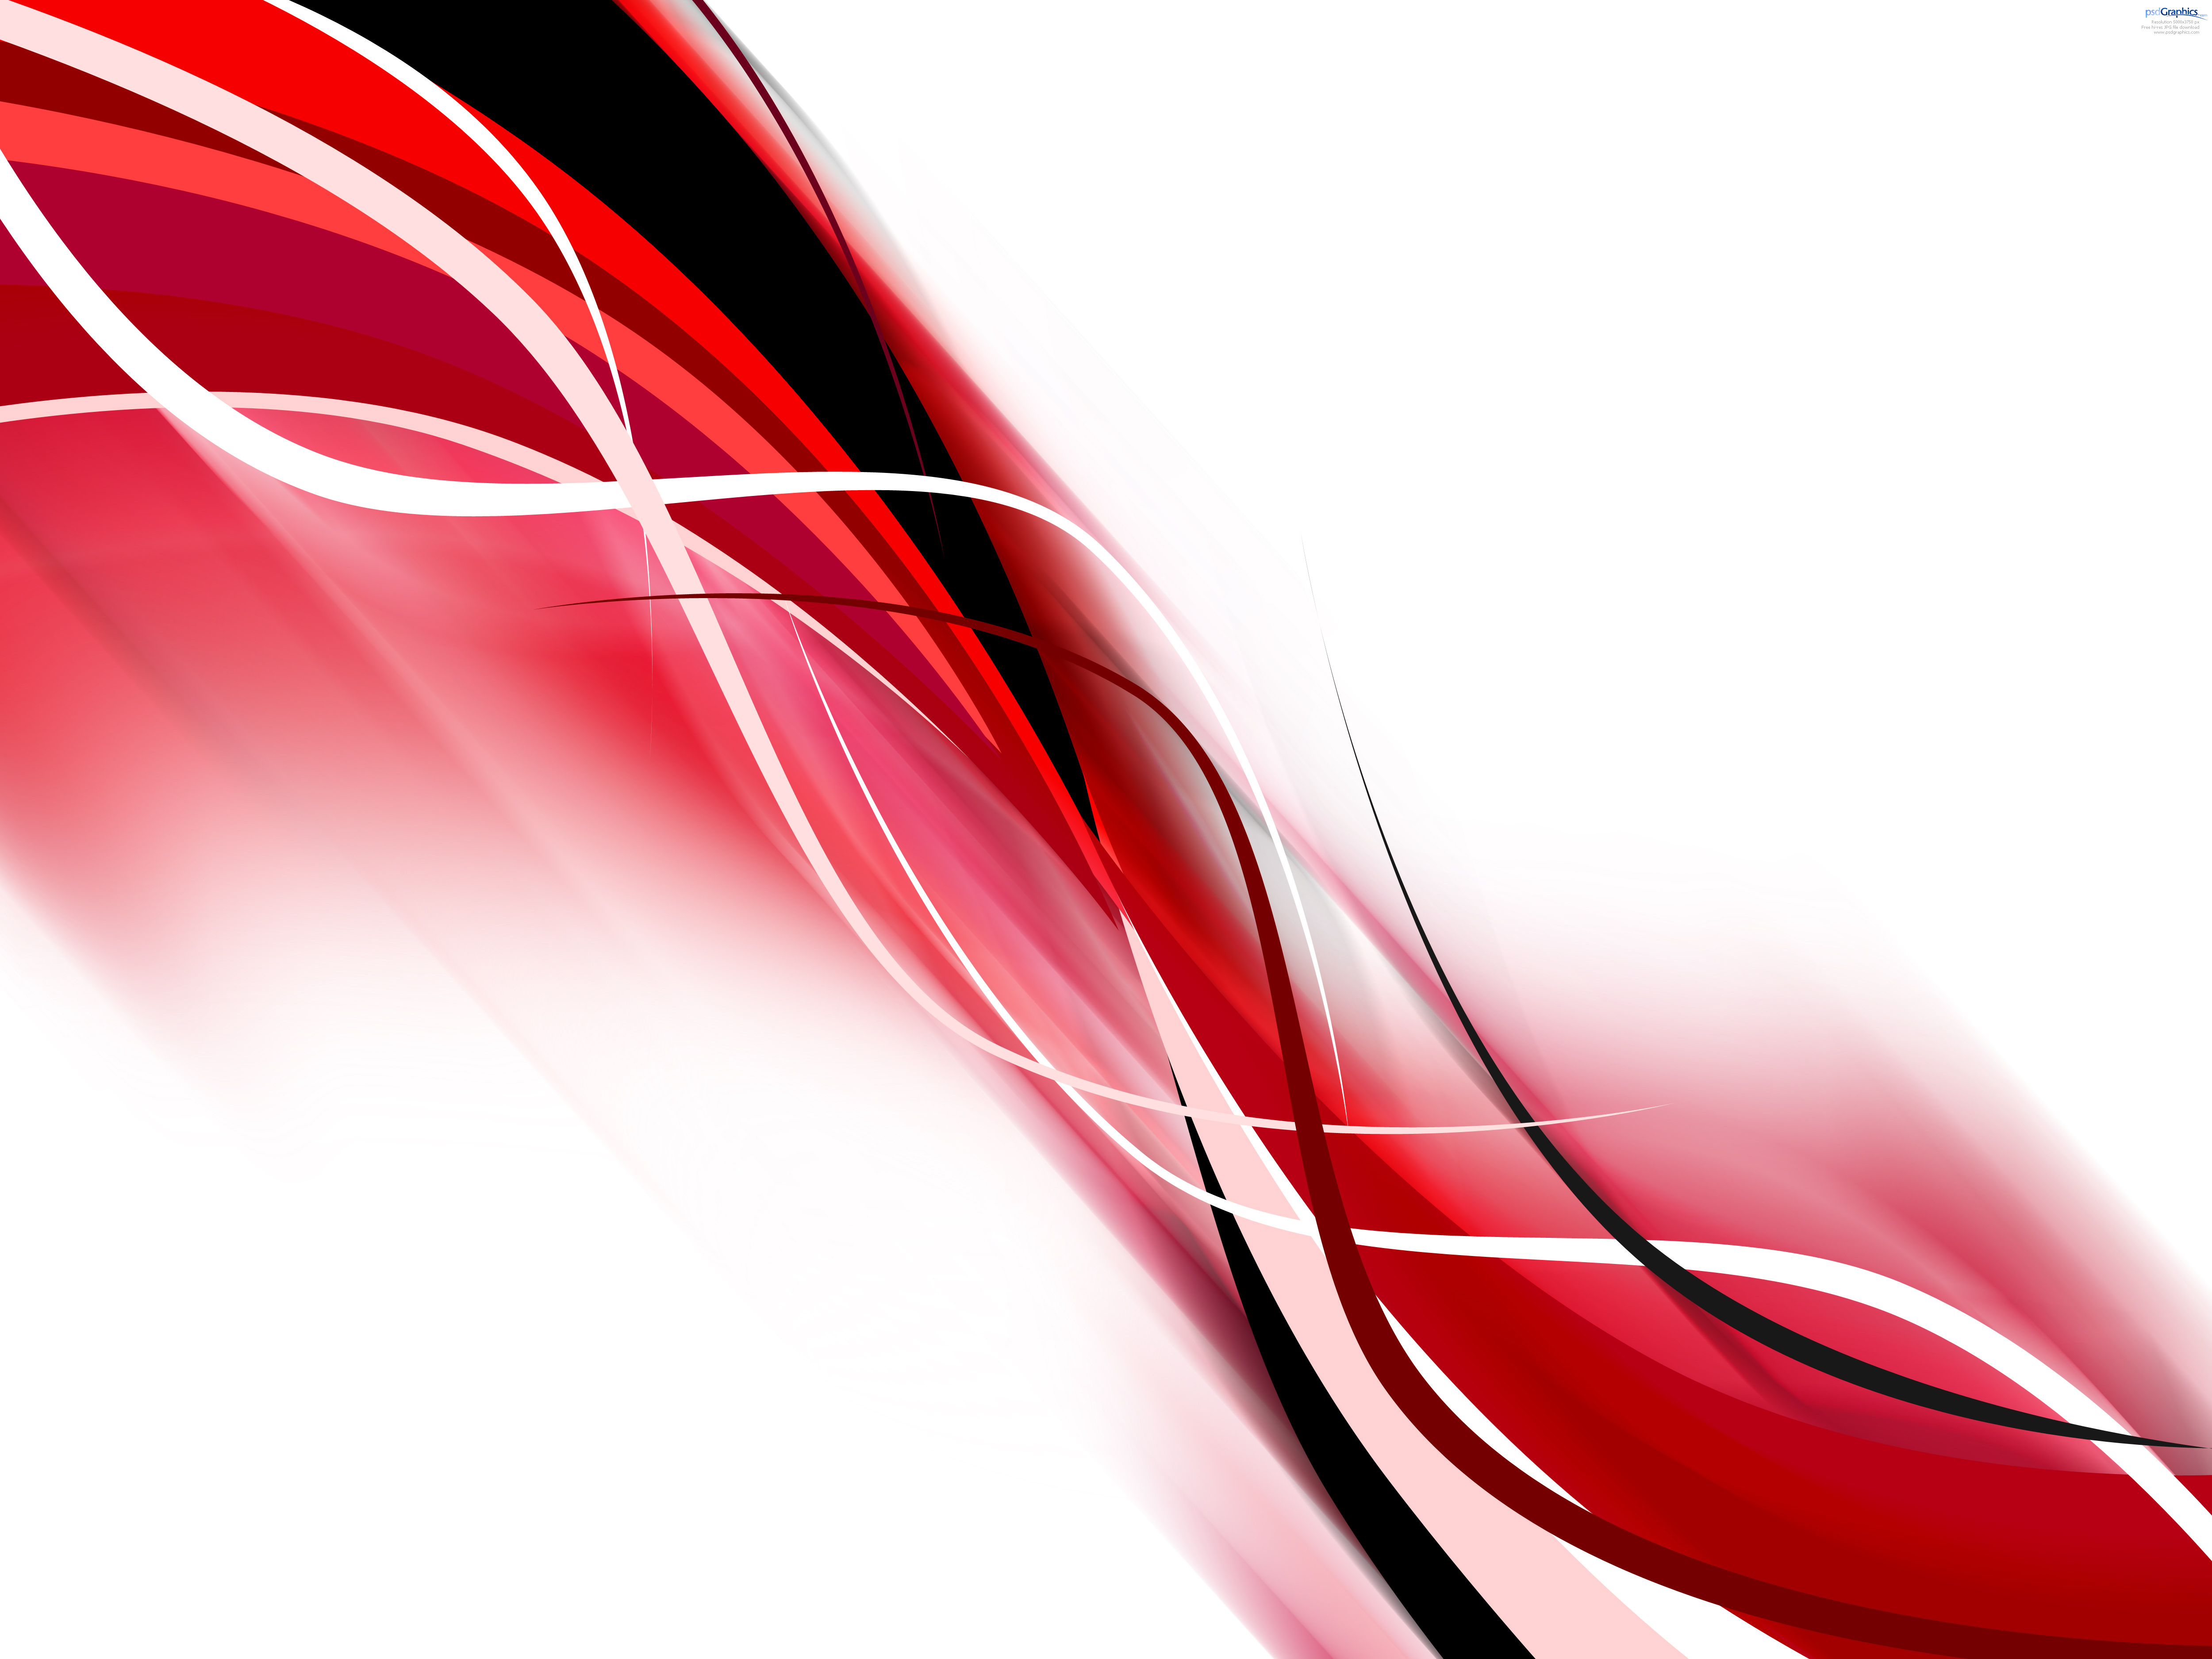 Abstract Art Black And White Red HD Wallpaper Background Image